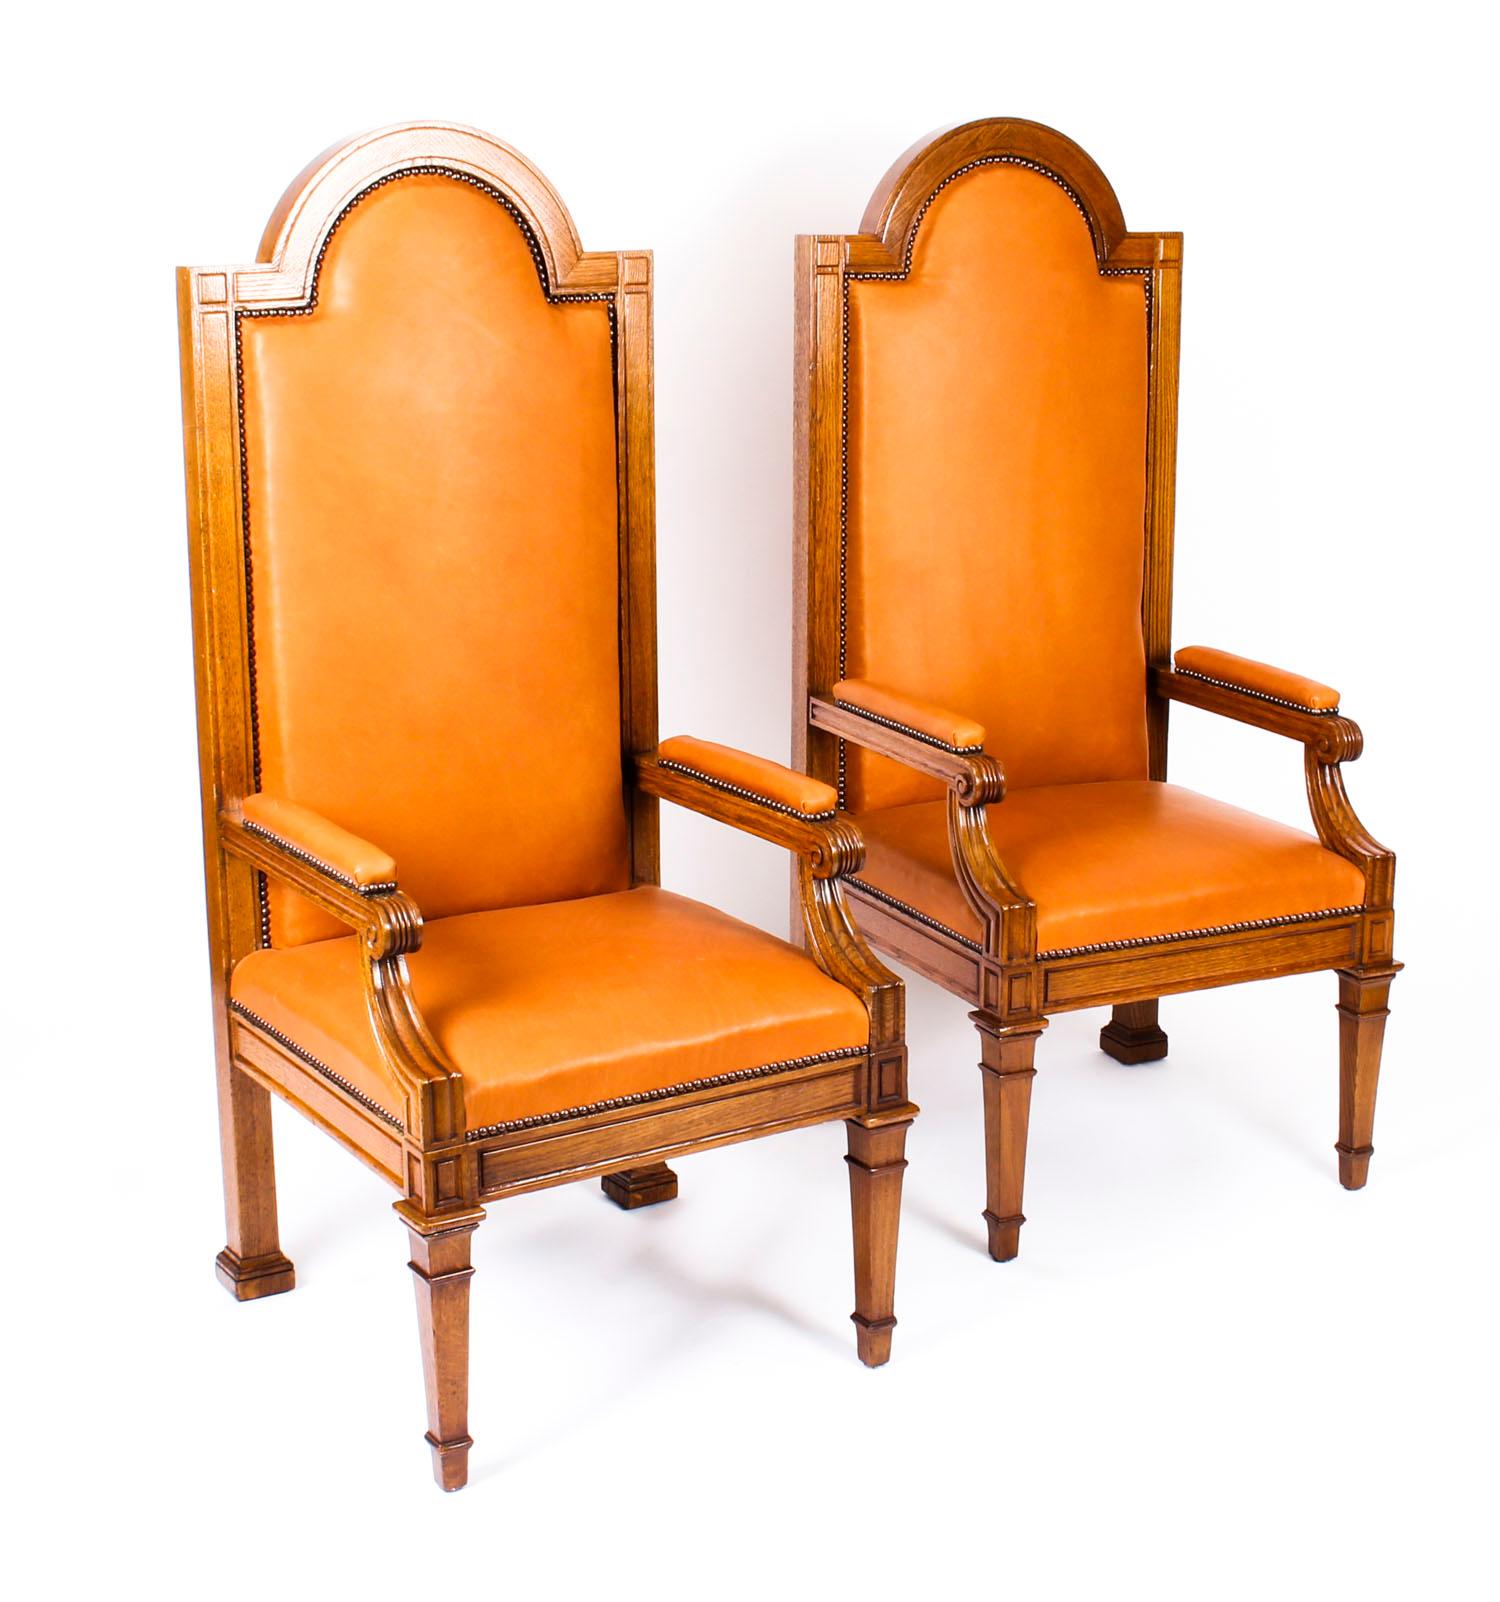 Antique Pair of Victorian Oak and Leather High Back Throne Chairs, 19th Century 10